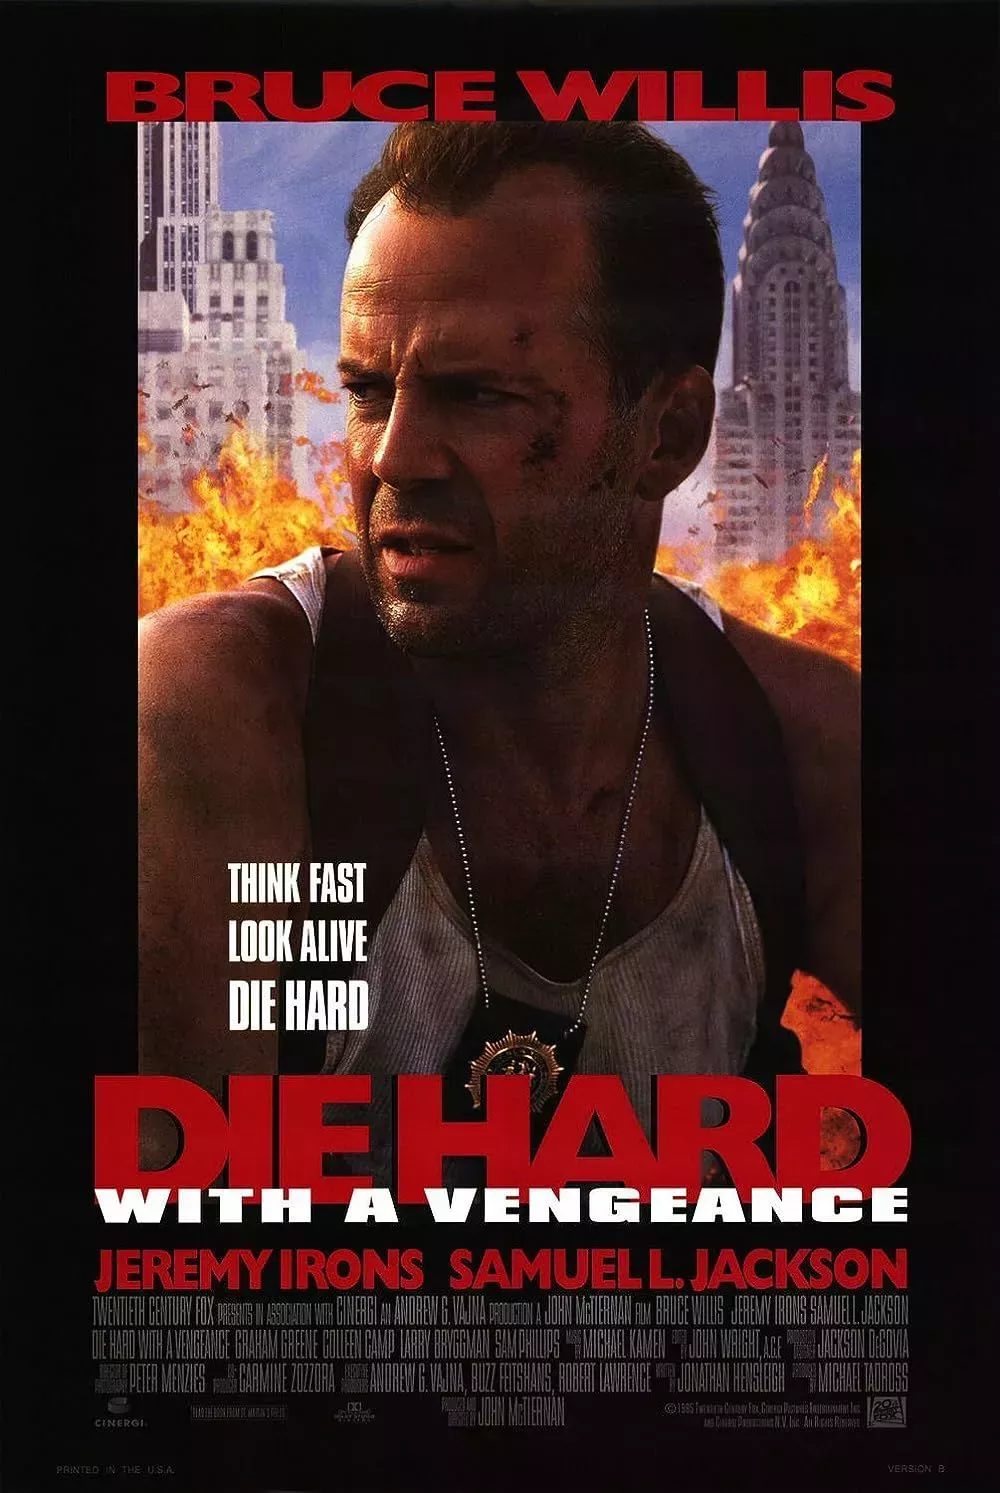 Bruce Willis in Die Hard with a Vengeance (1995)